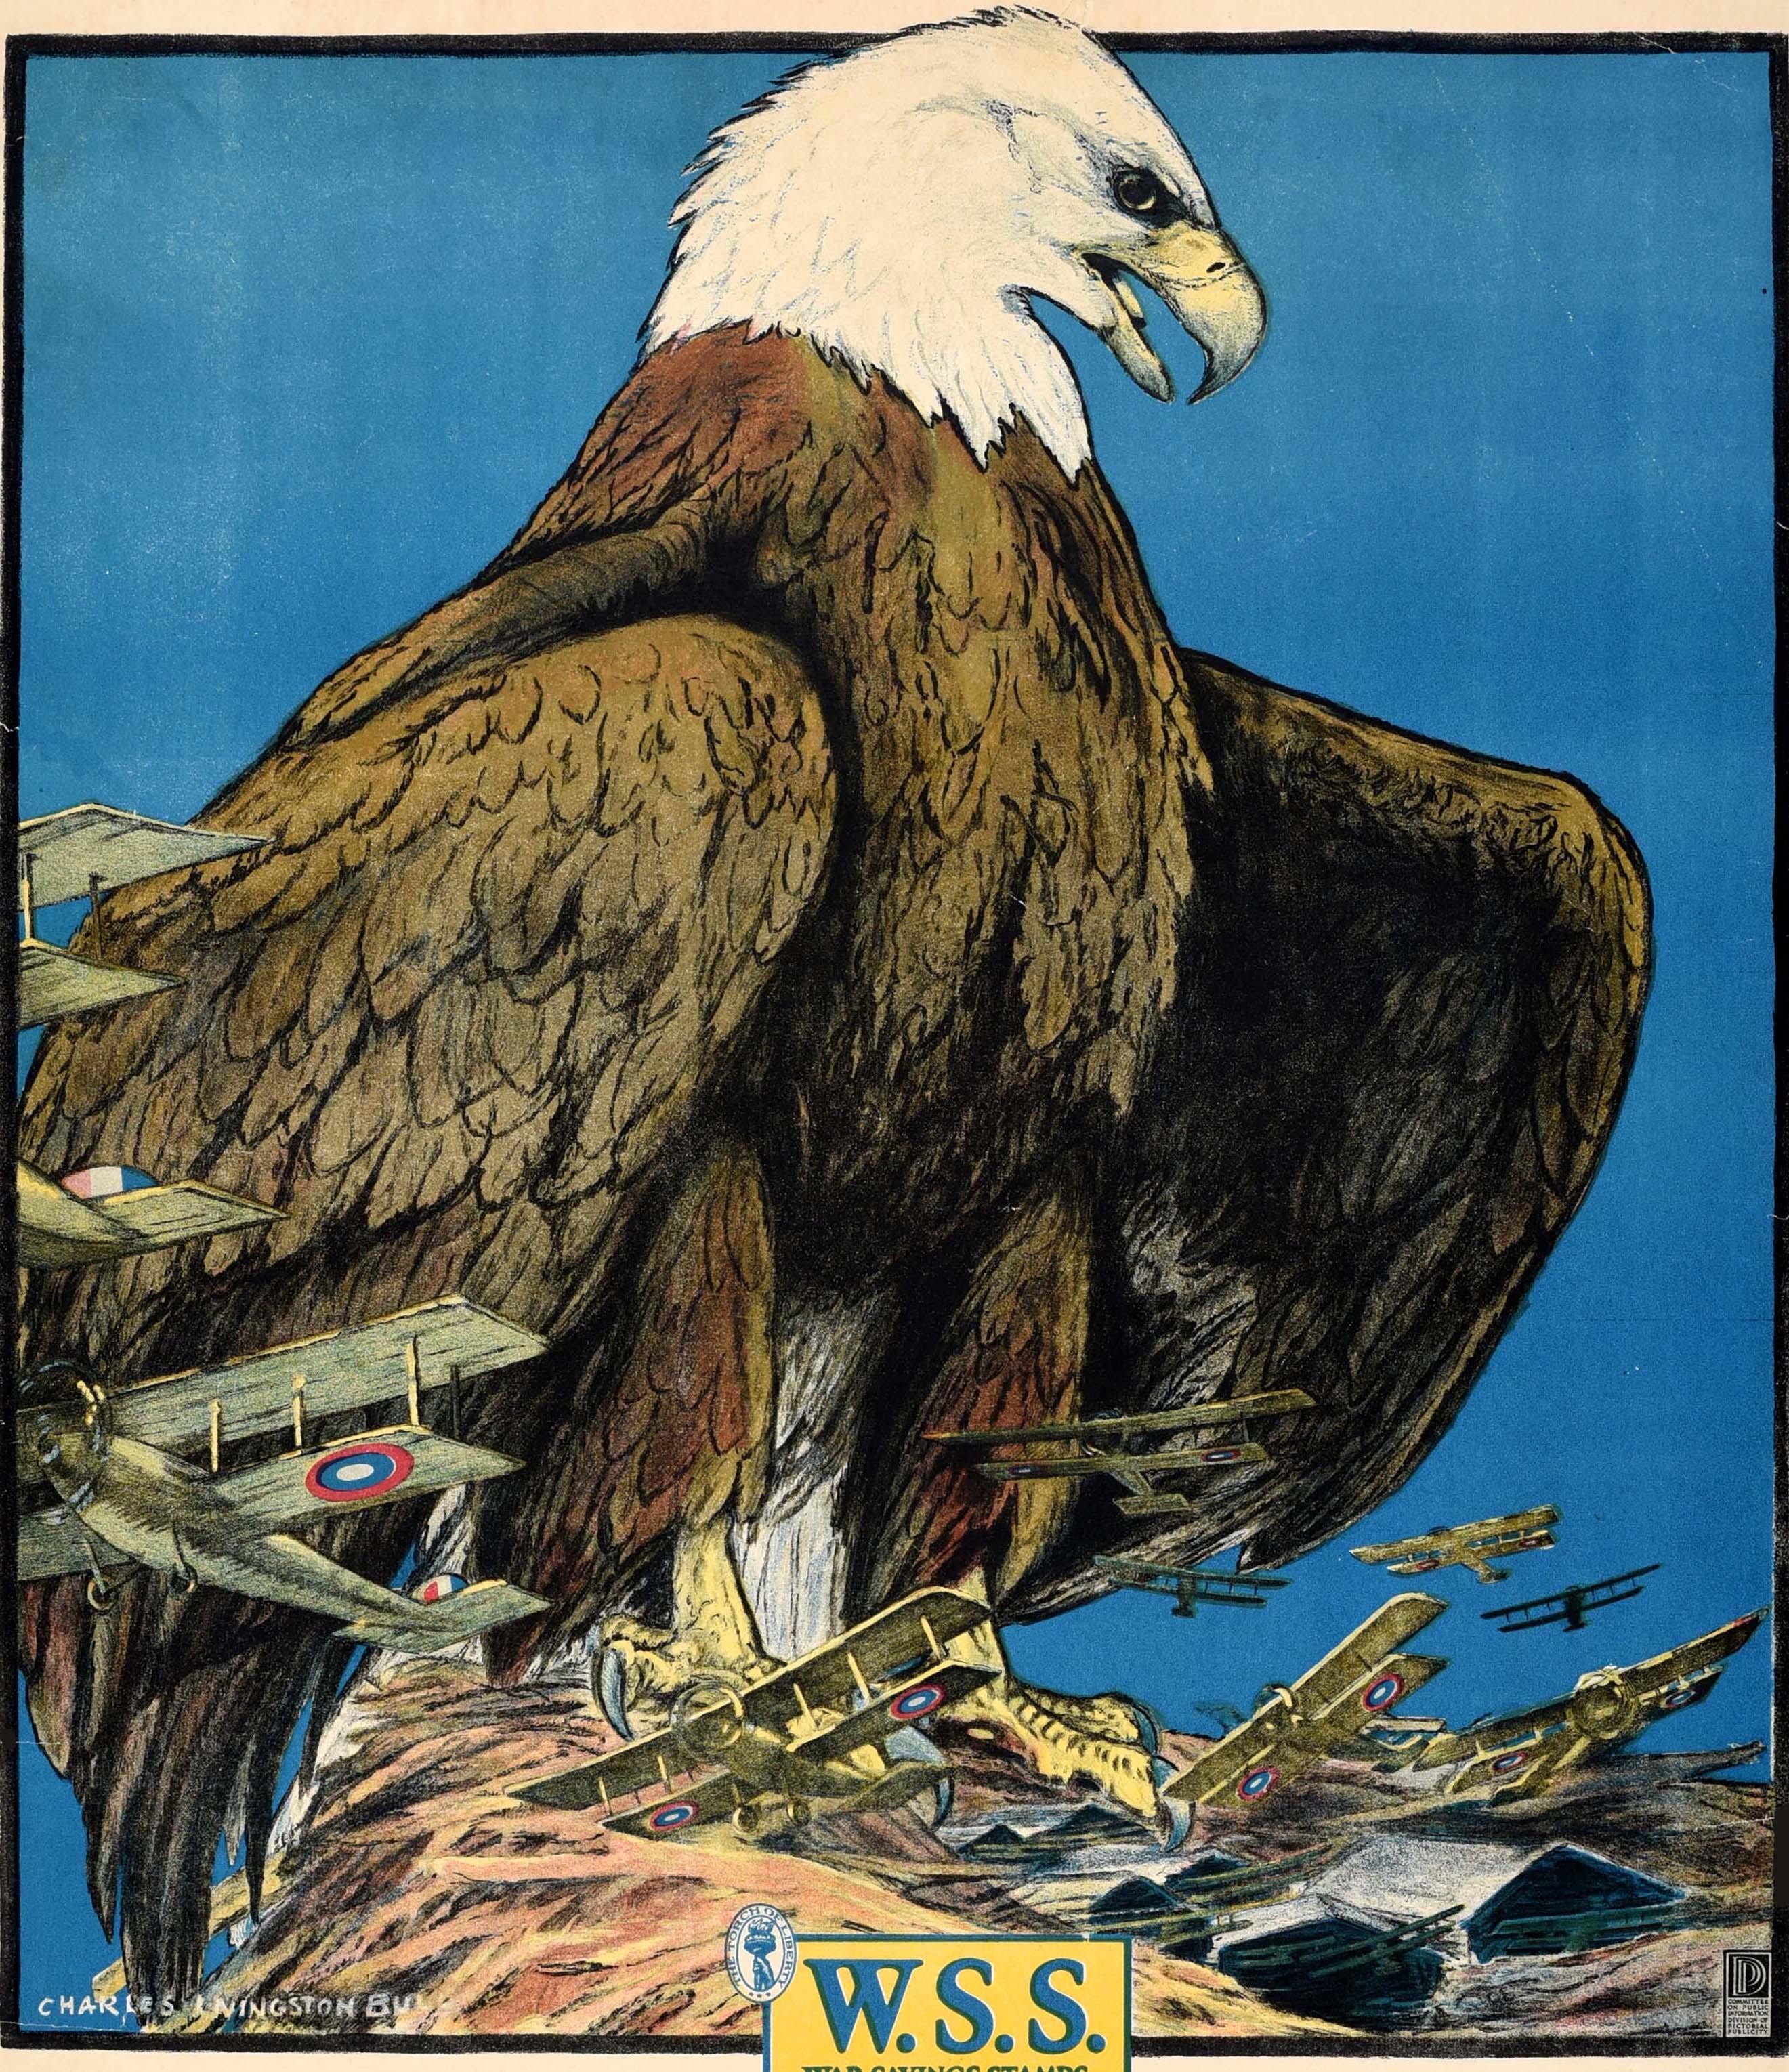 Original antique World War One poster in support of the Home Front War Effort - Keep Him Free Buy War Savings Stamps issued by the United States Treasury Dept - featuring dynamic artwork by the American artist known for his wildlife illustrations